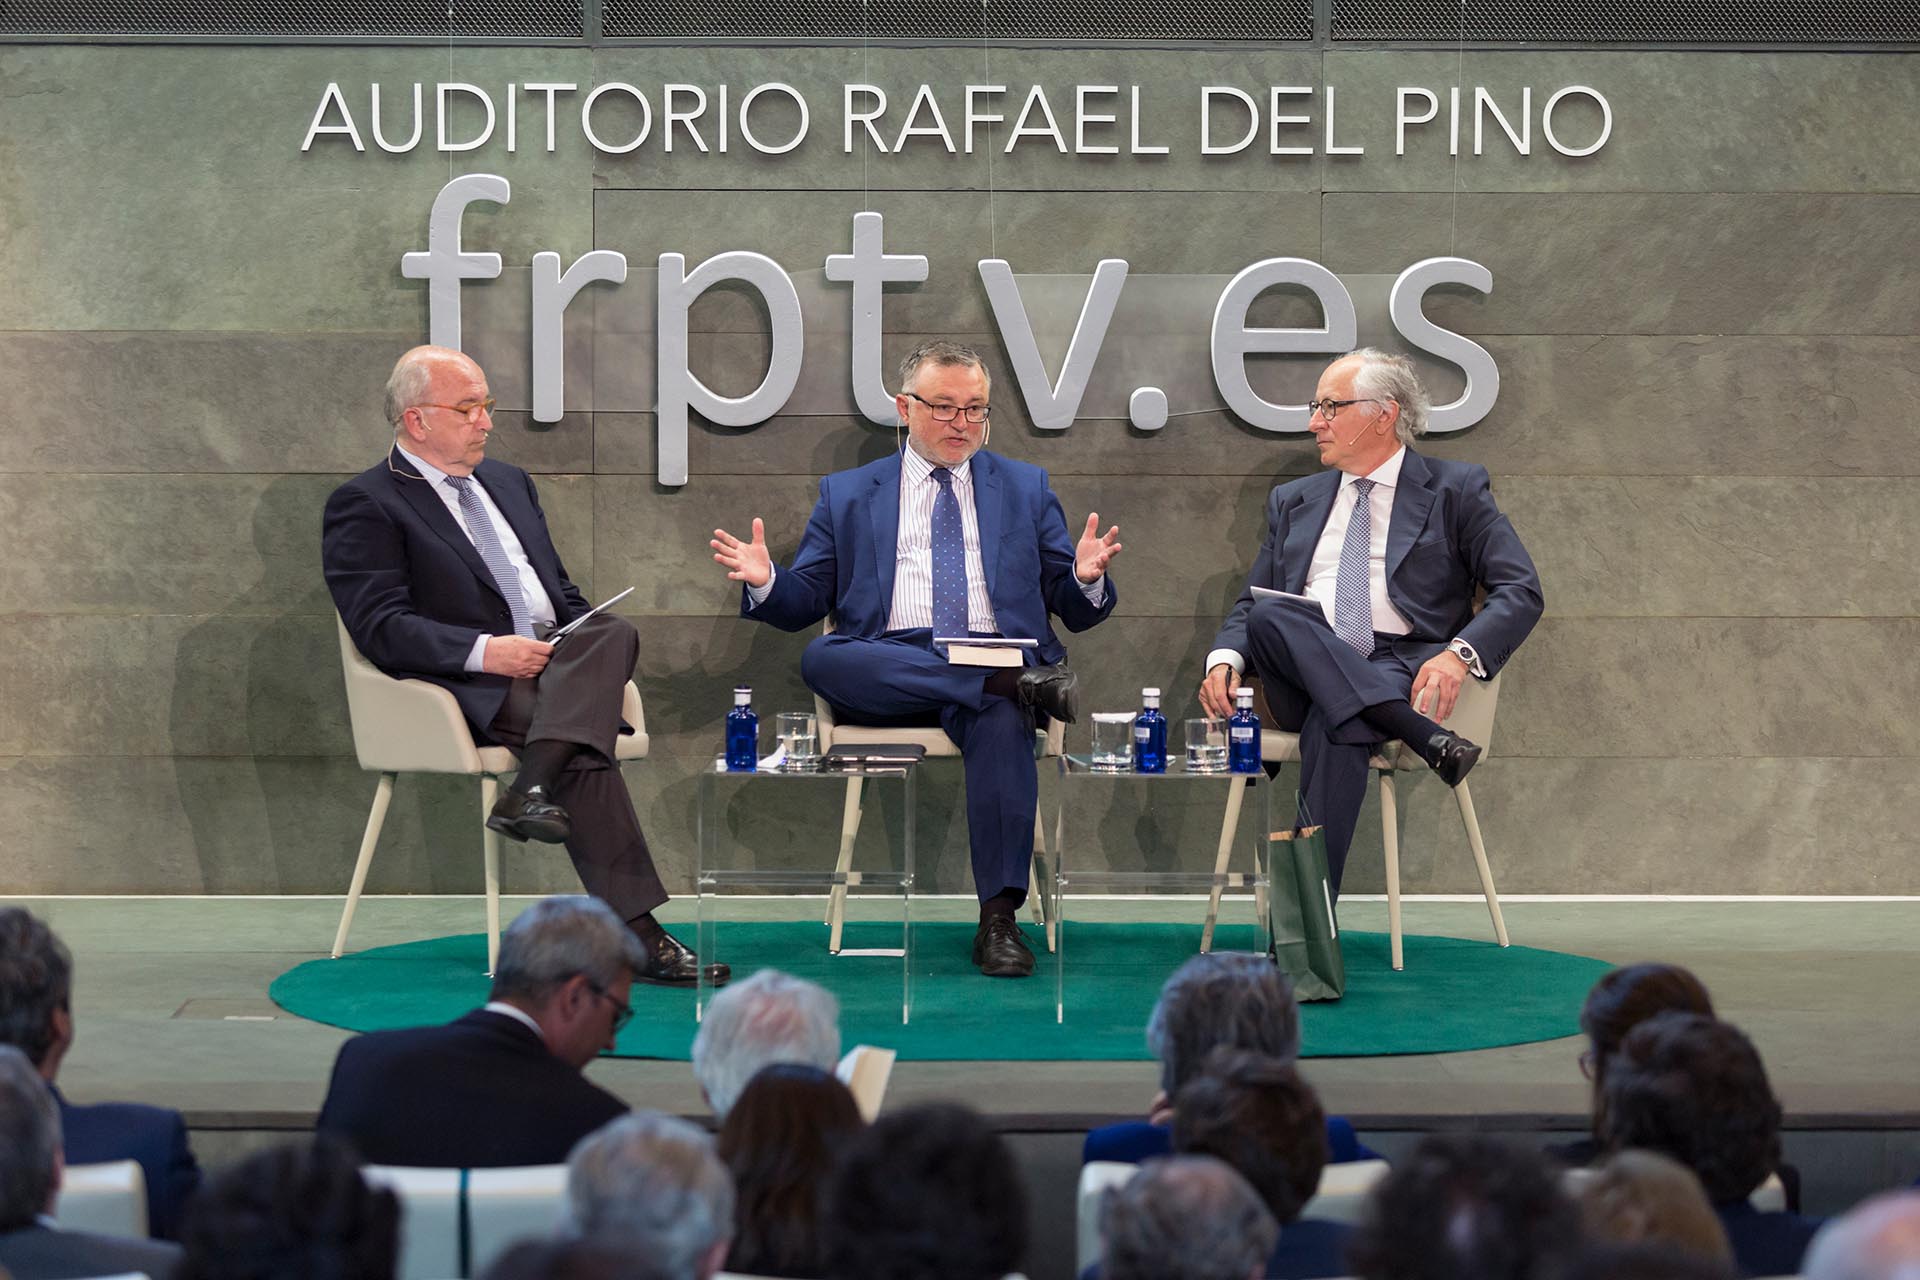 Reforms for a rational growth of the Spanish economy